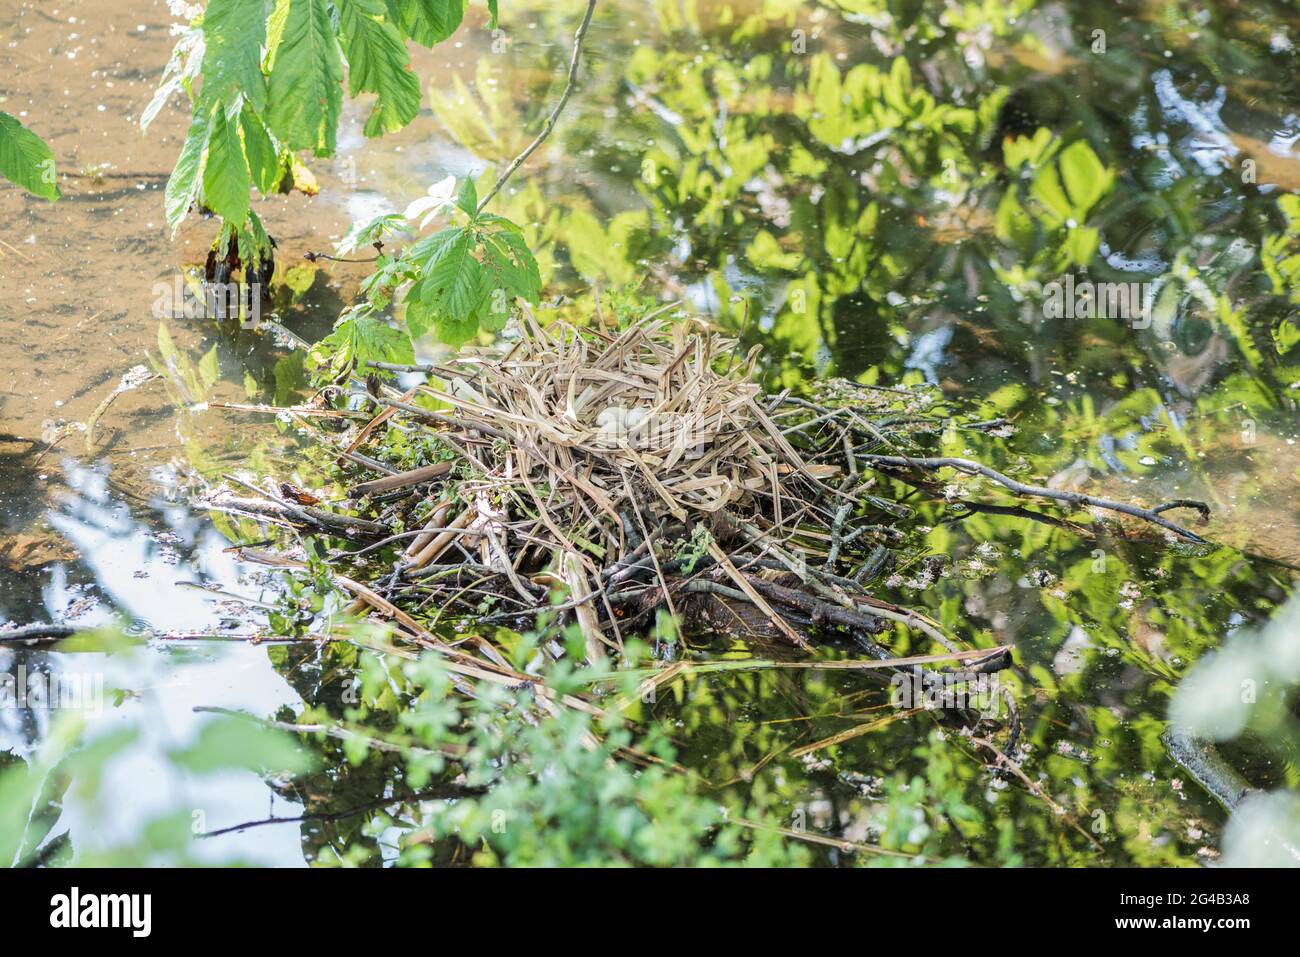 An open Coot's nest (Atra fulica) Stock Photo